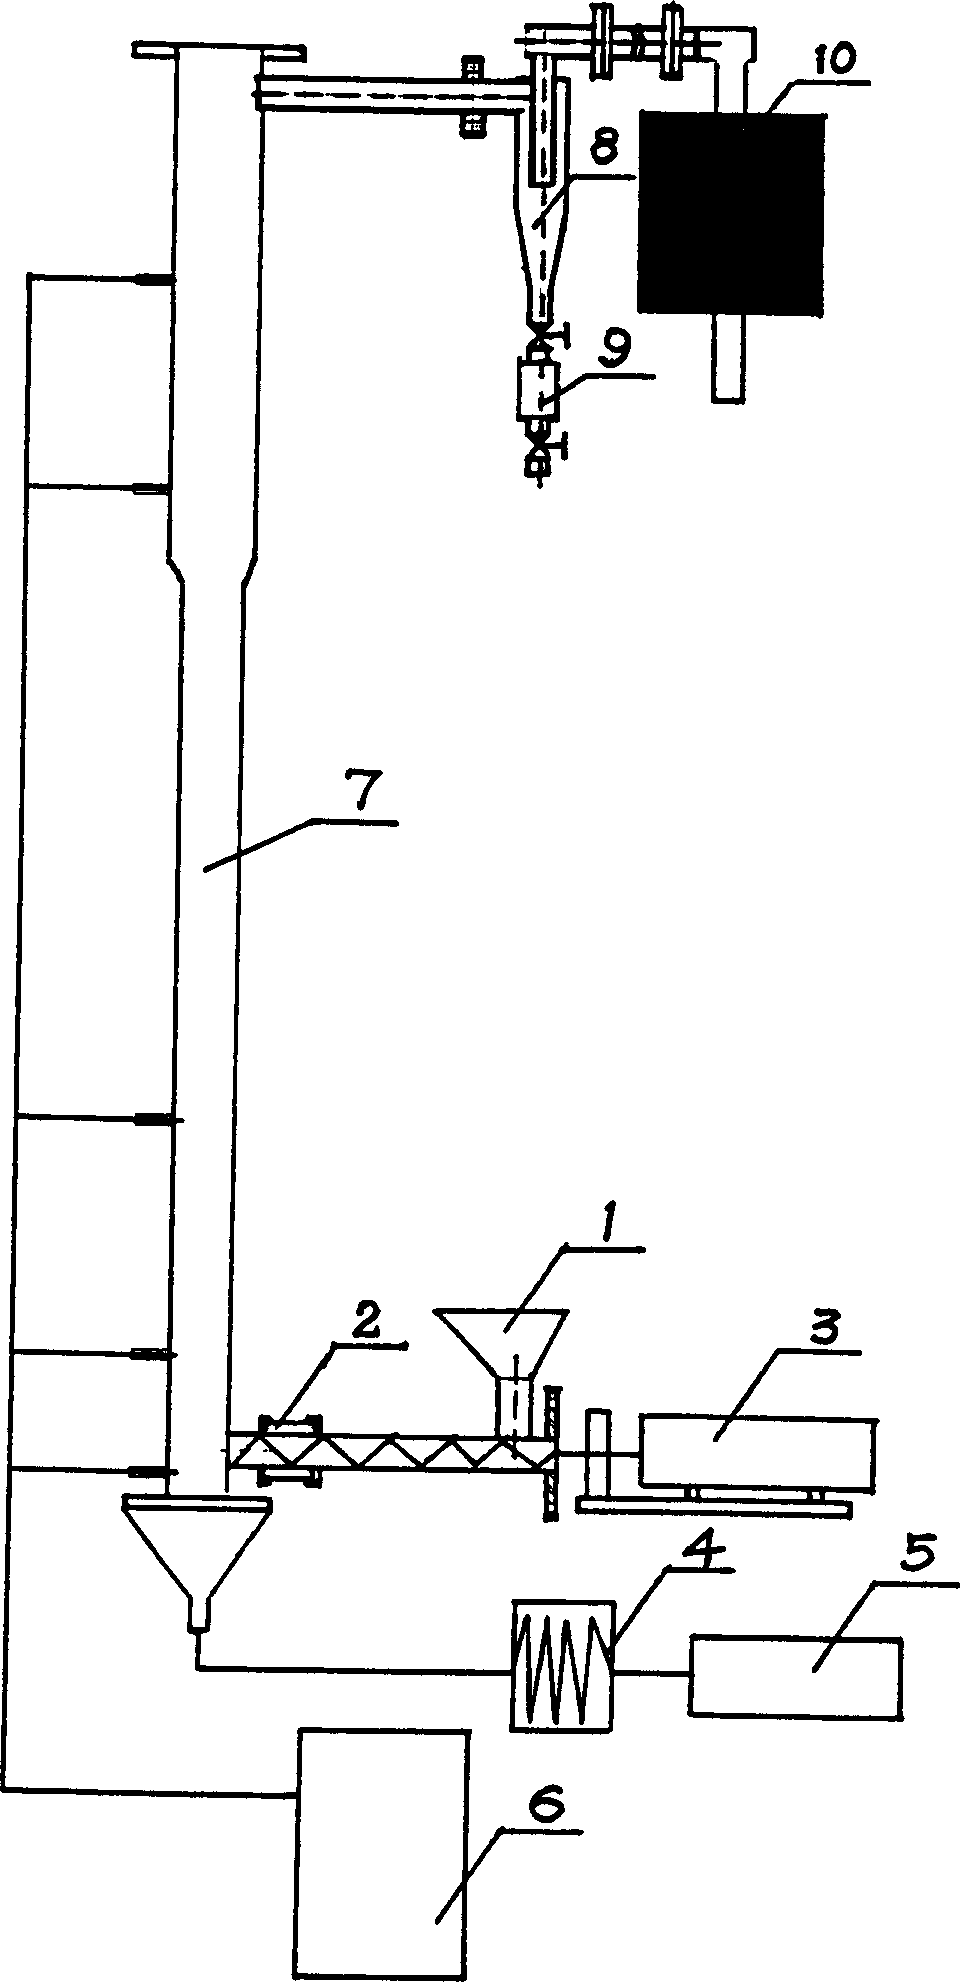 Method and apparatus for producing hydrogen by catalytic cracking of biologic matter